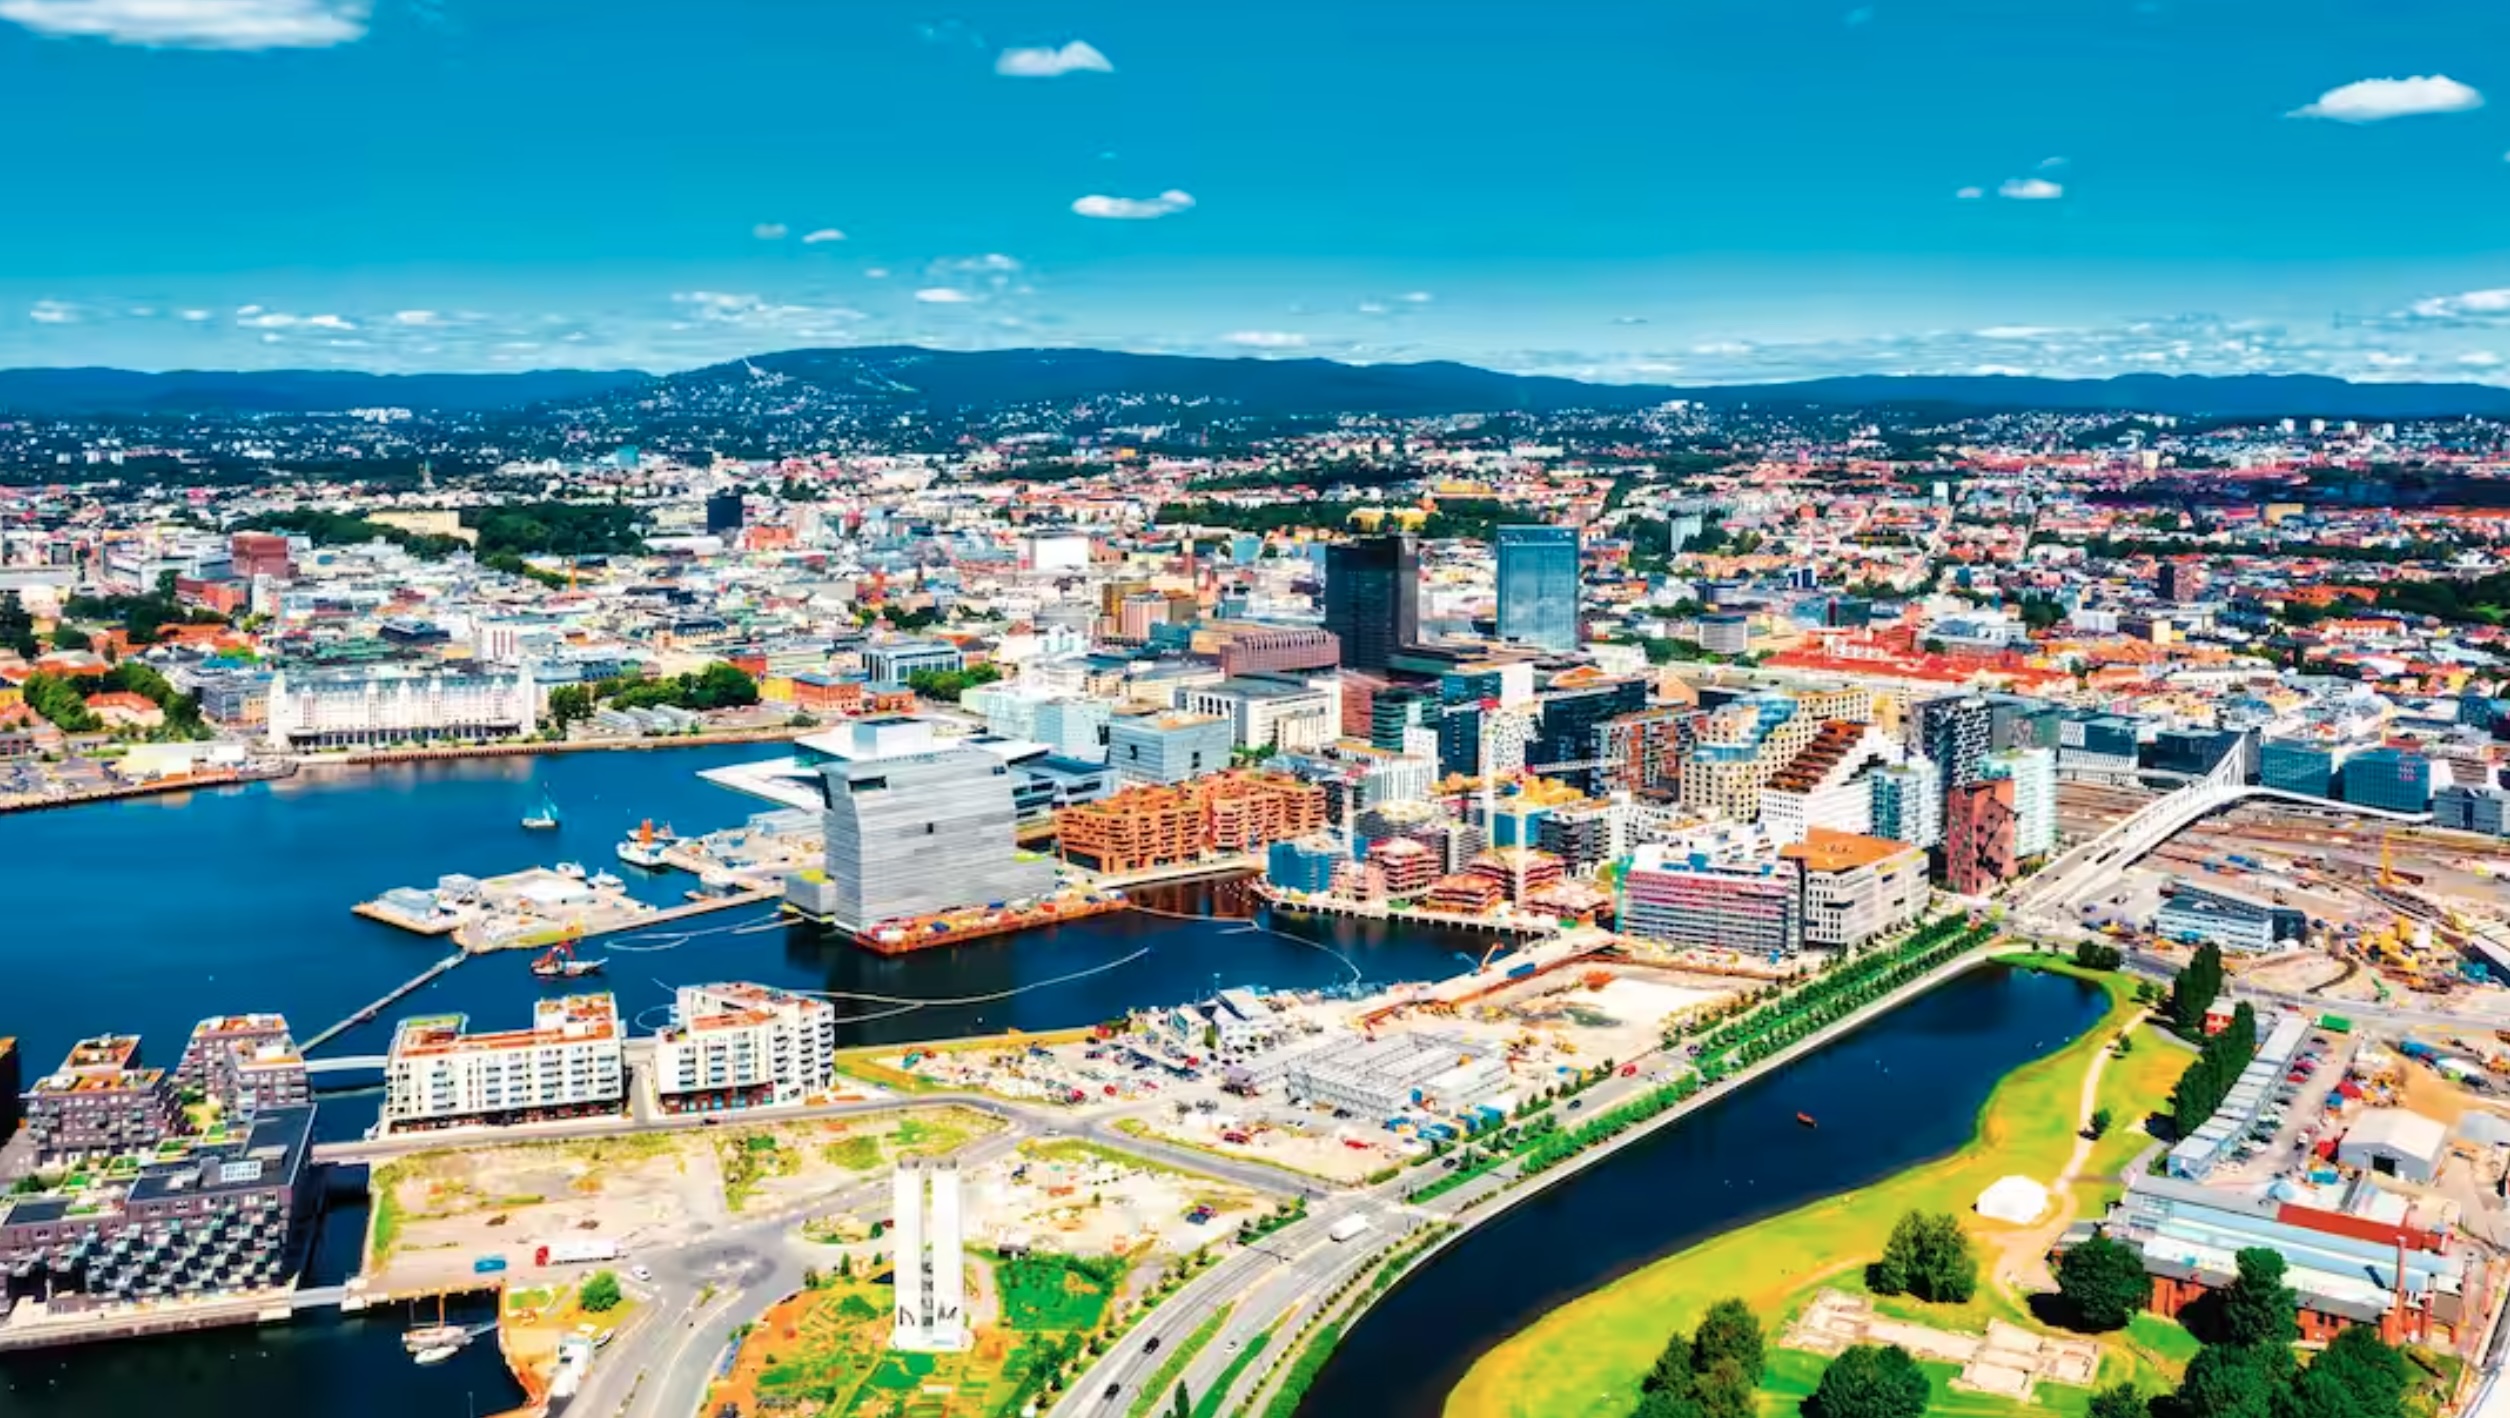 aerial view of Oslo city